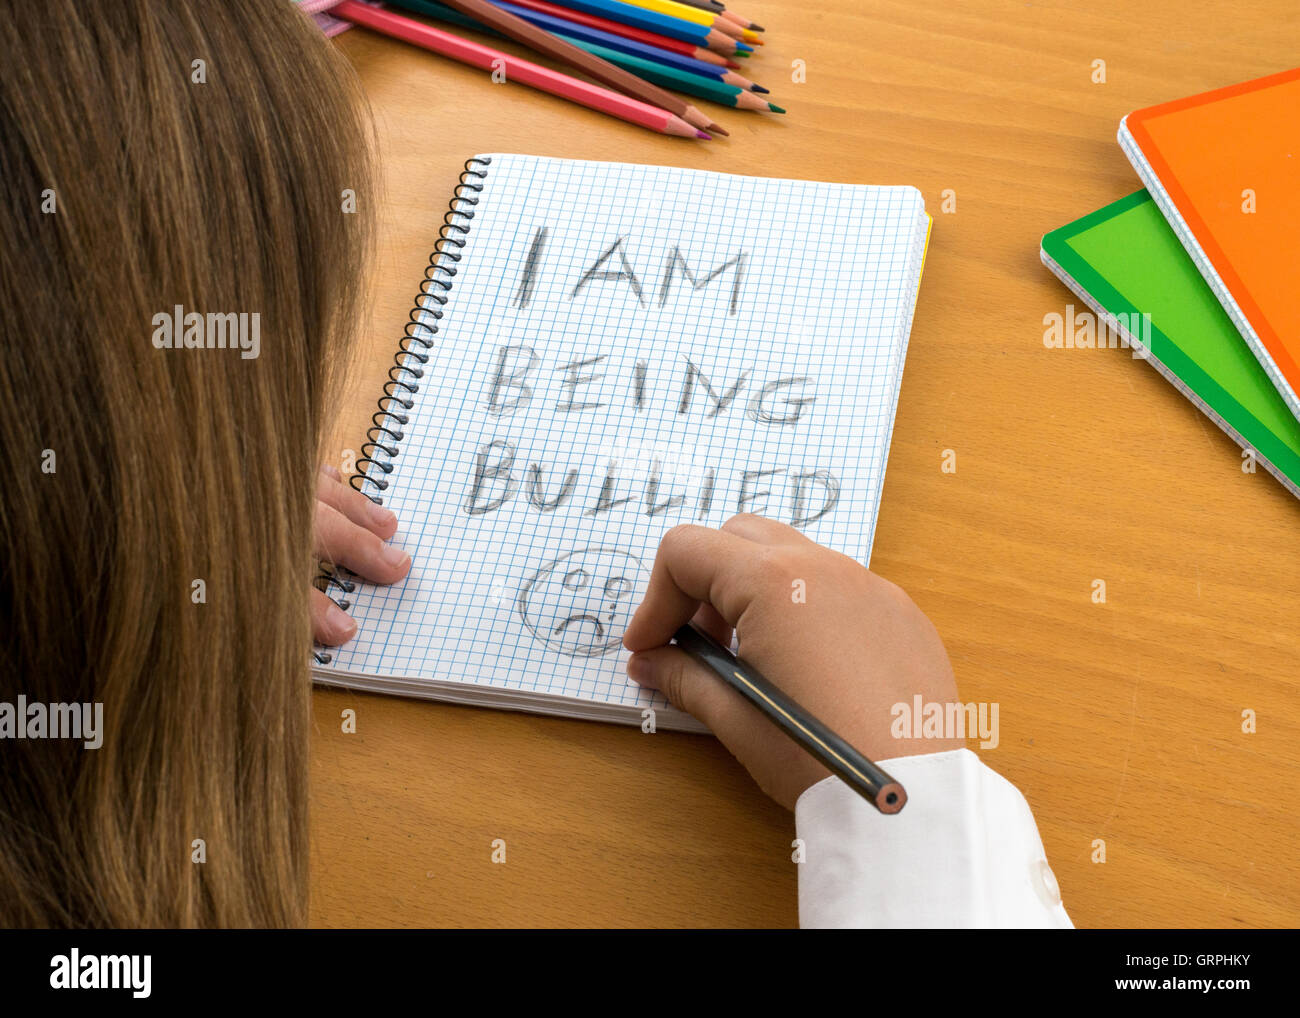 An Horizontal image / poster covering the Social Issues of child abuse,  schoolchild in uniform at a desk asking for help Stock Photo